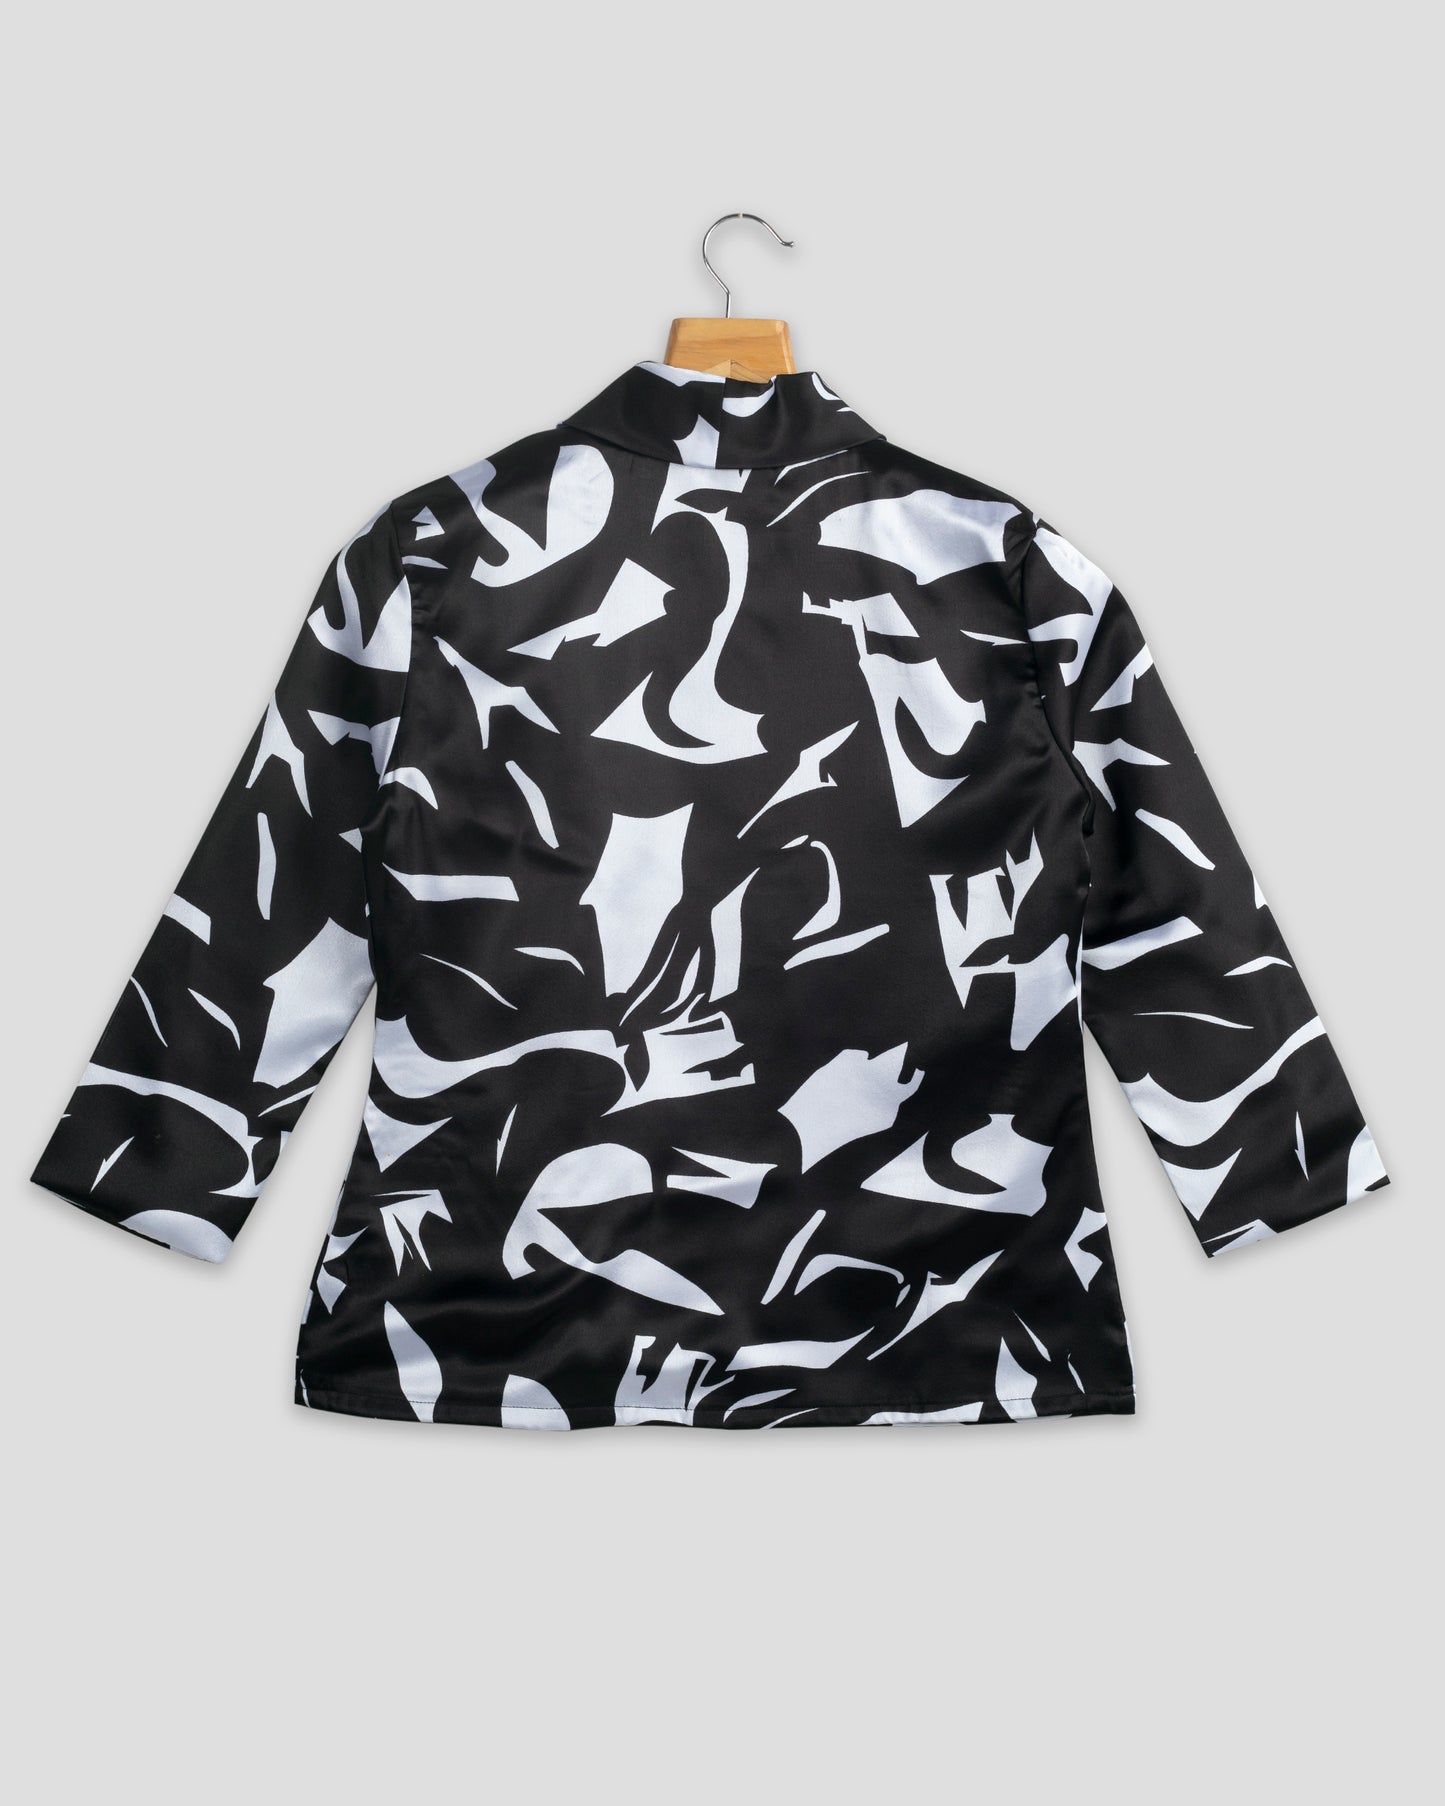 Stylish Black Abstract Jacket For Women